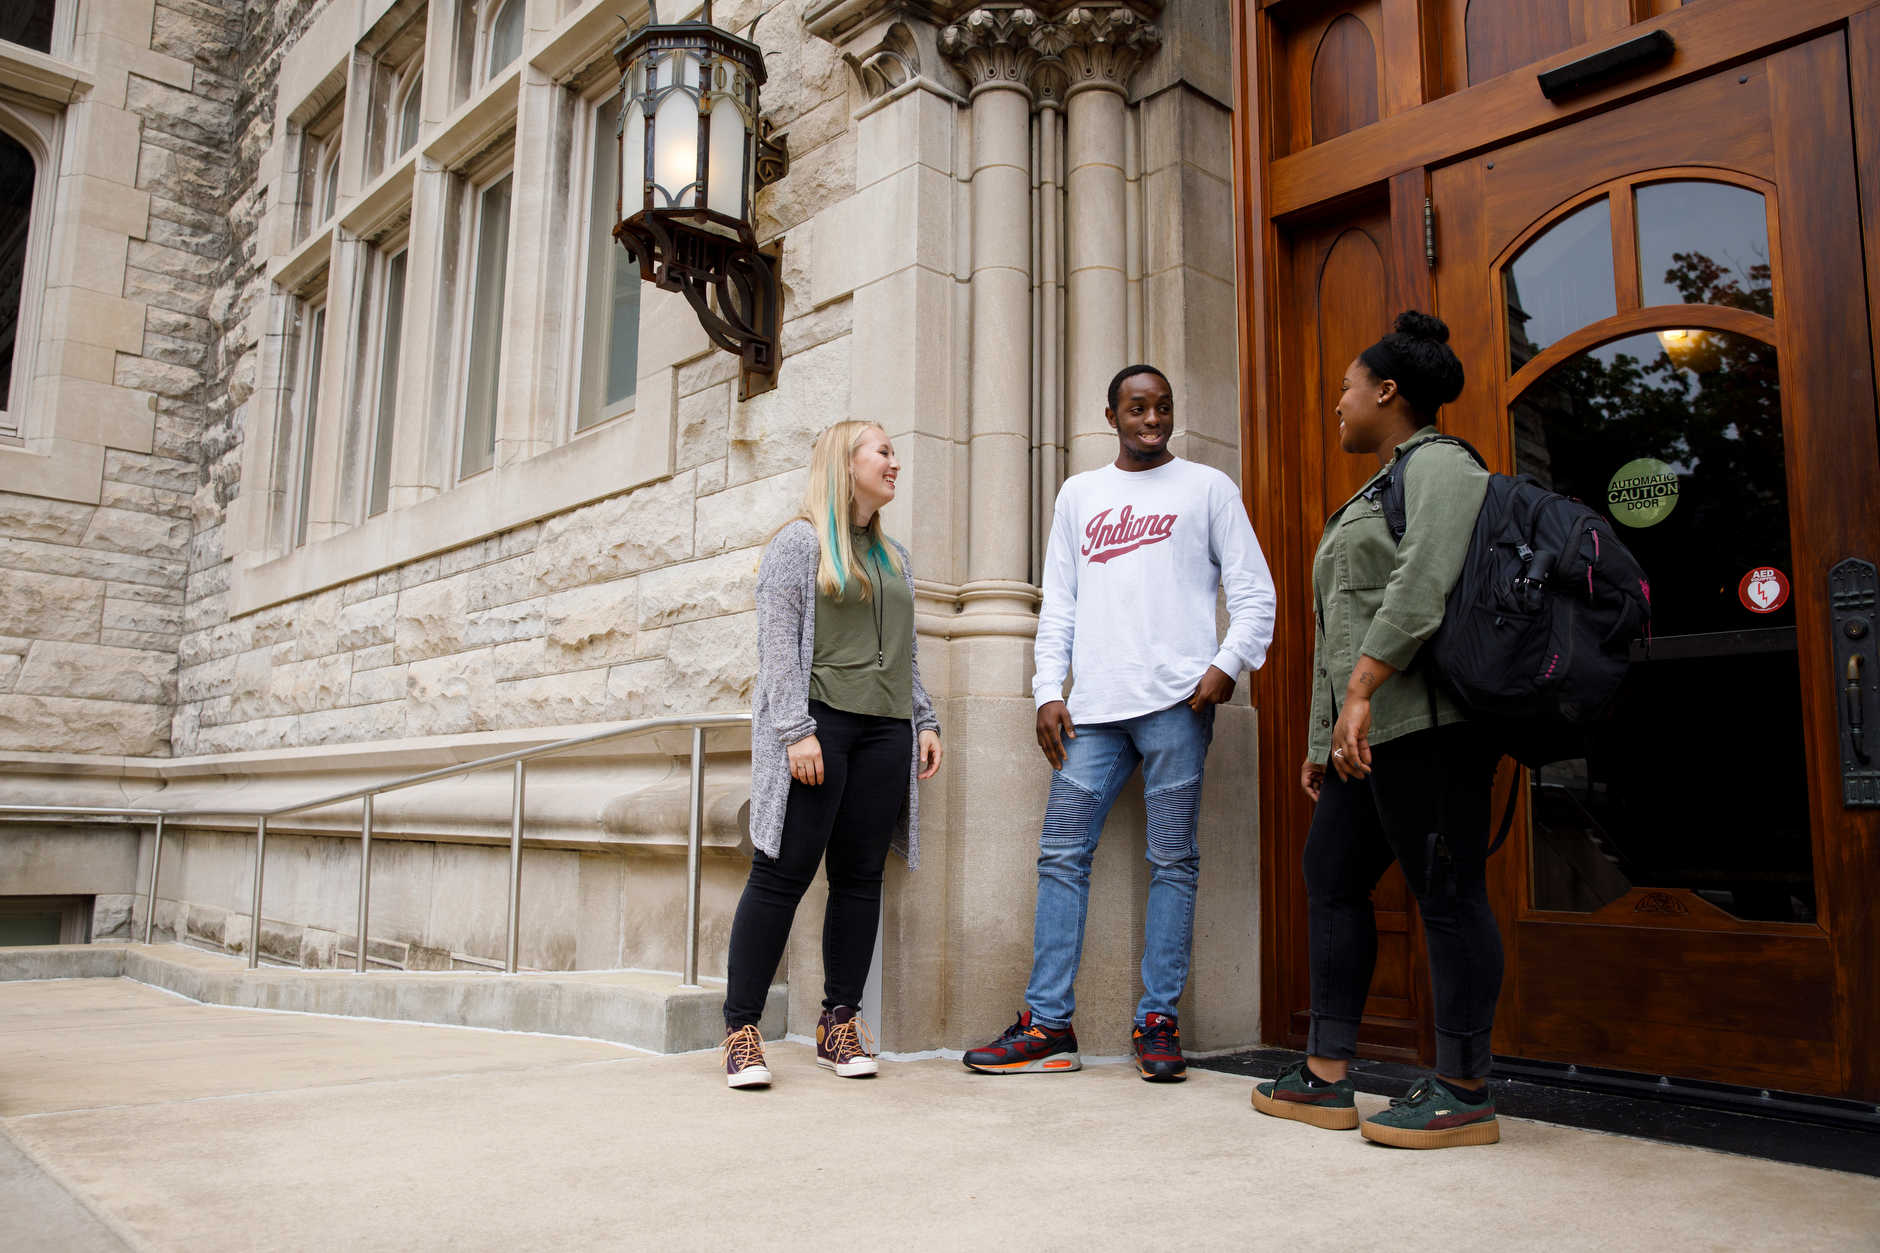 Photo shoot outside Franklin Hall at The Media School at Indiana University on Thursday, Oct. 4, 2018.